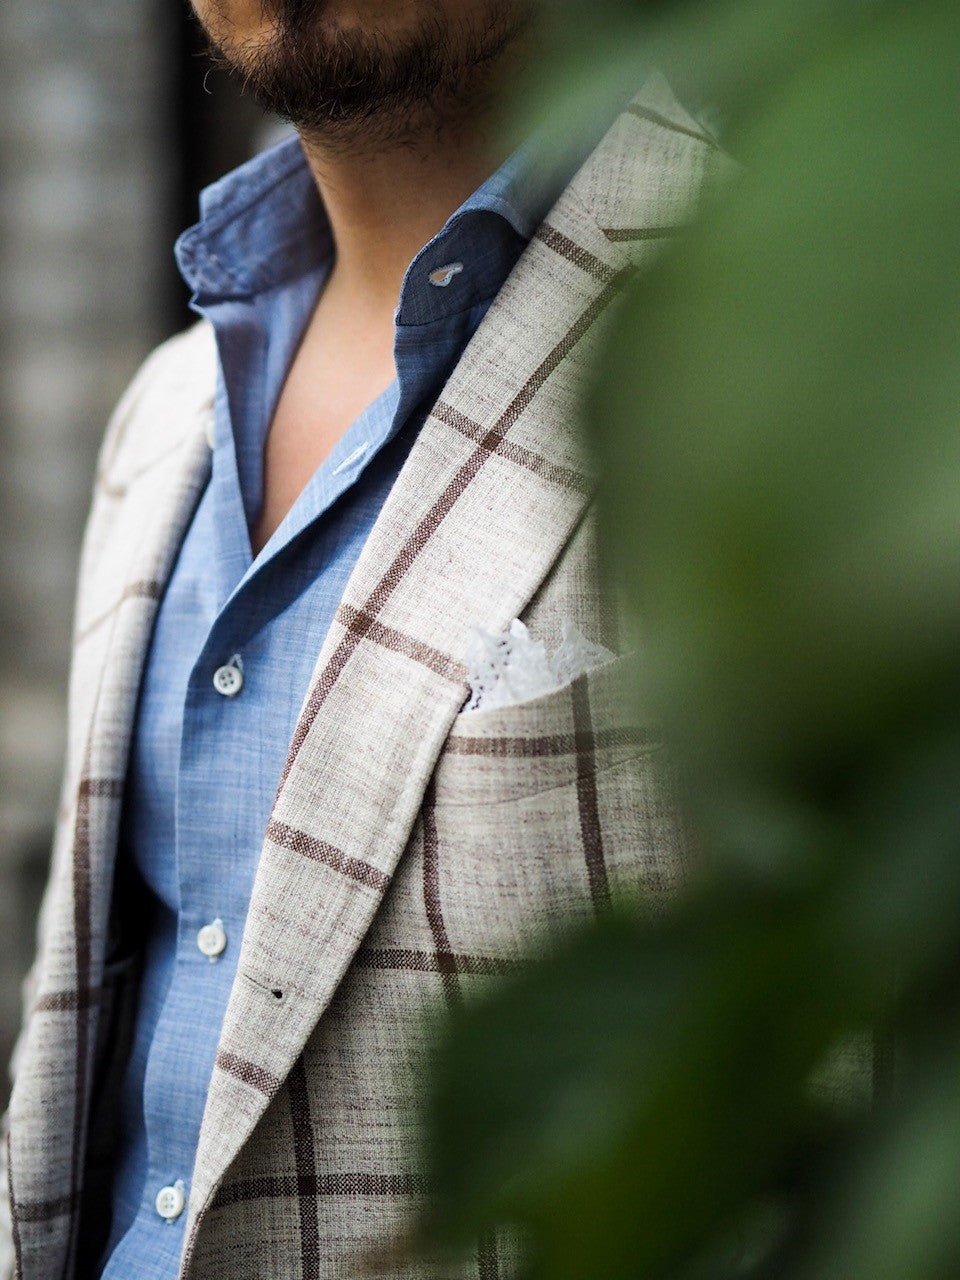 Made-to-measure windowpane suit jacket with chambray shirt